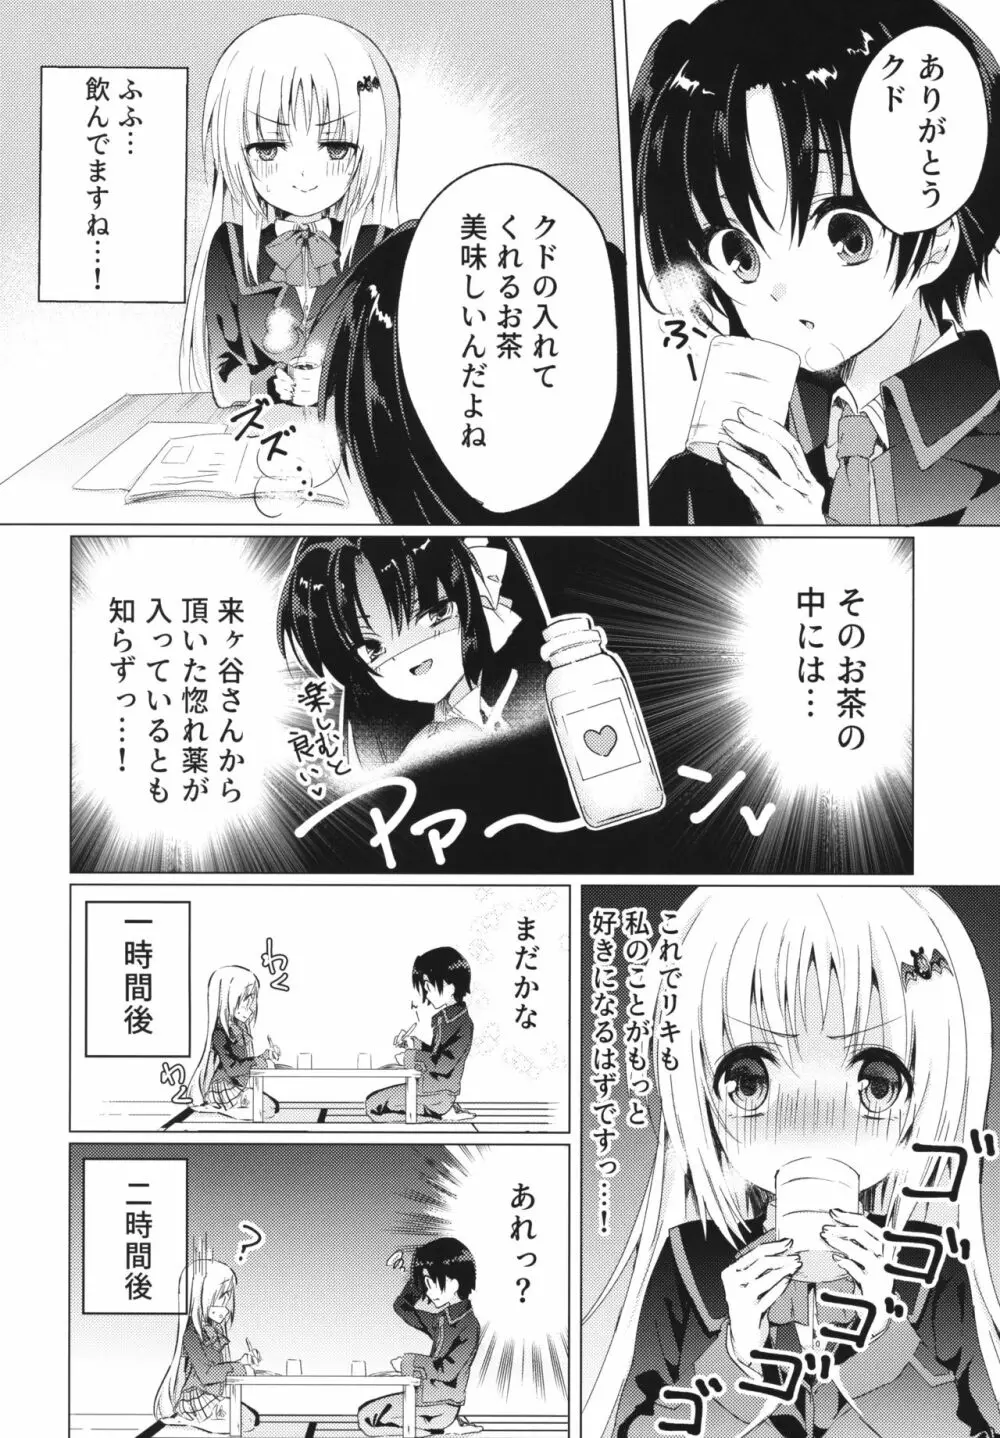 Kud After2 - page3